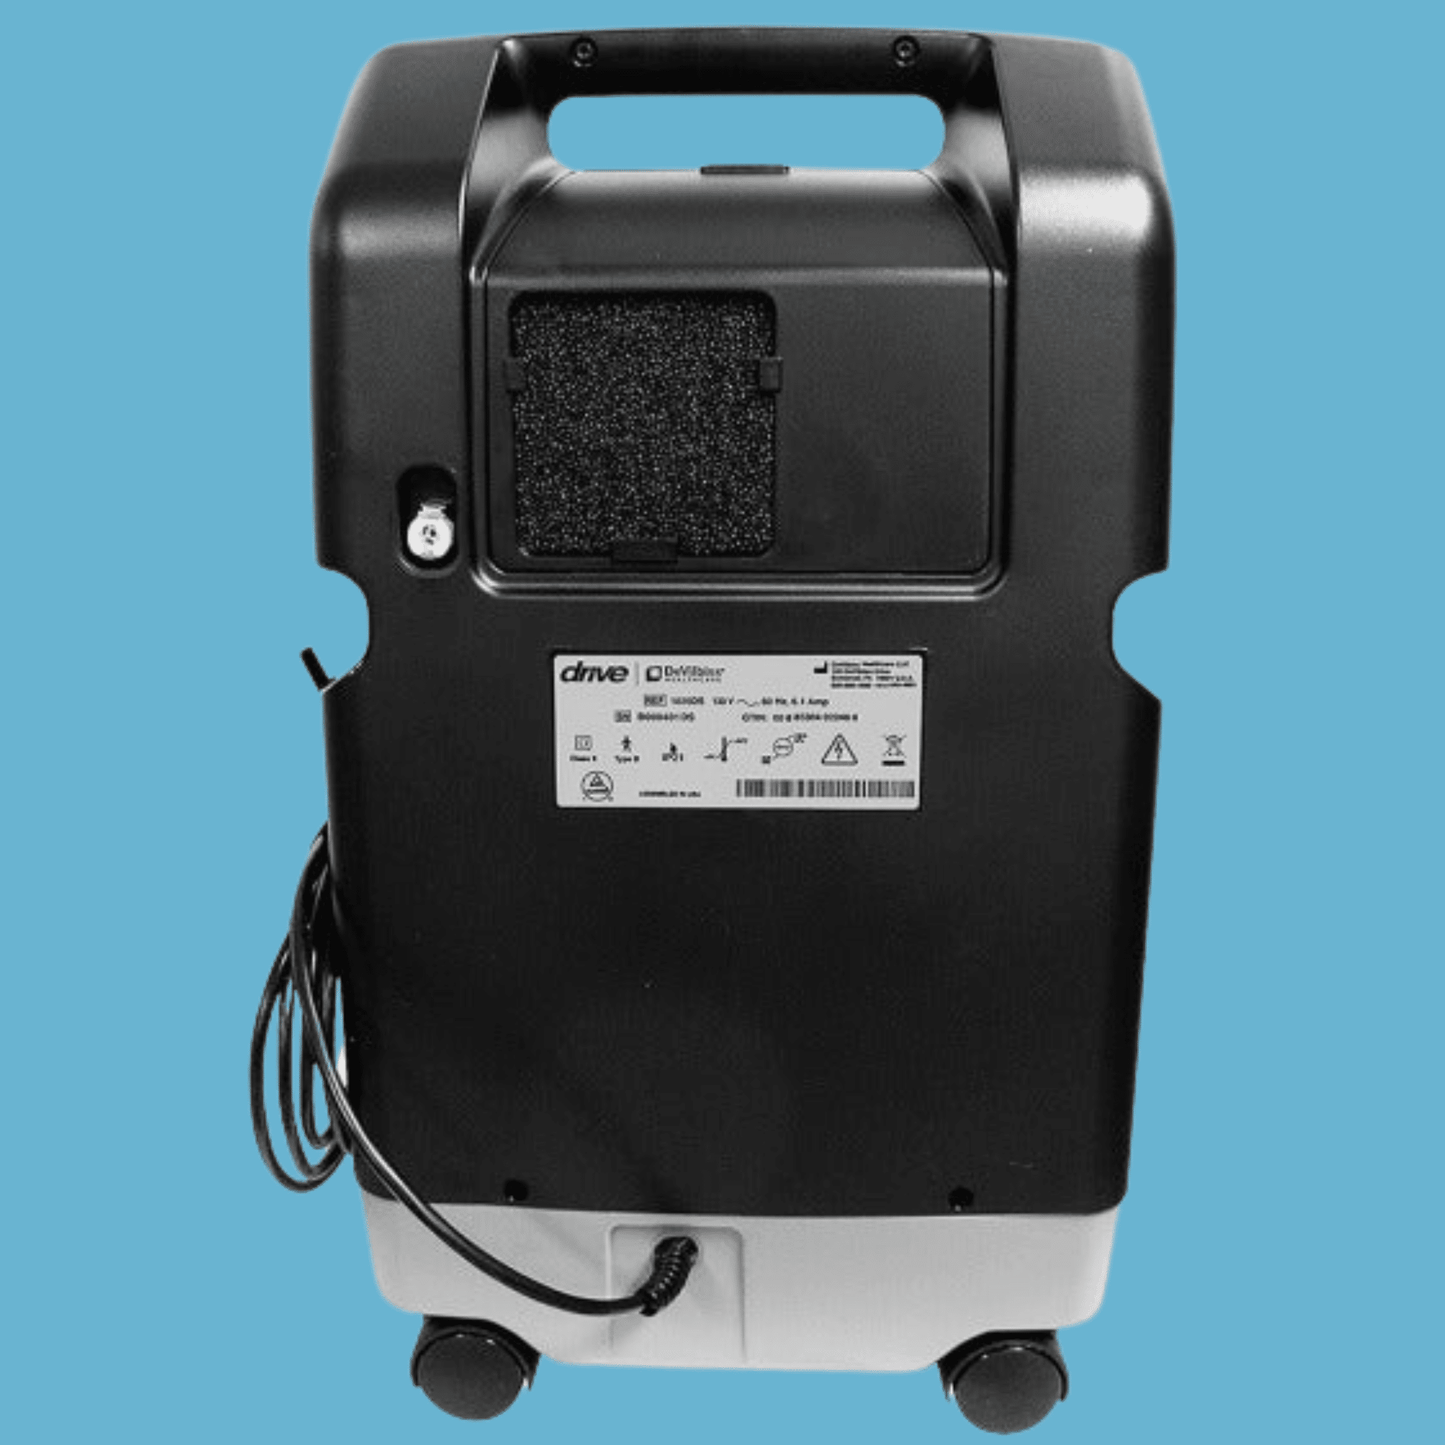 Drive DeVilbiss-10 Liter Oxygen Concentrator Oxygen Concentrator for Hyperbaric Chamber